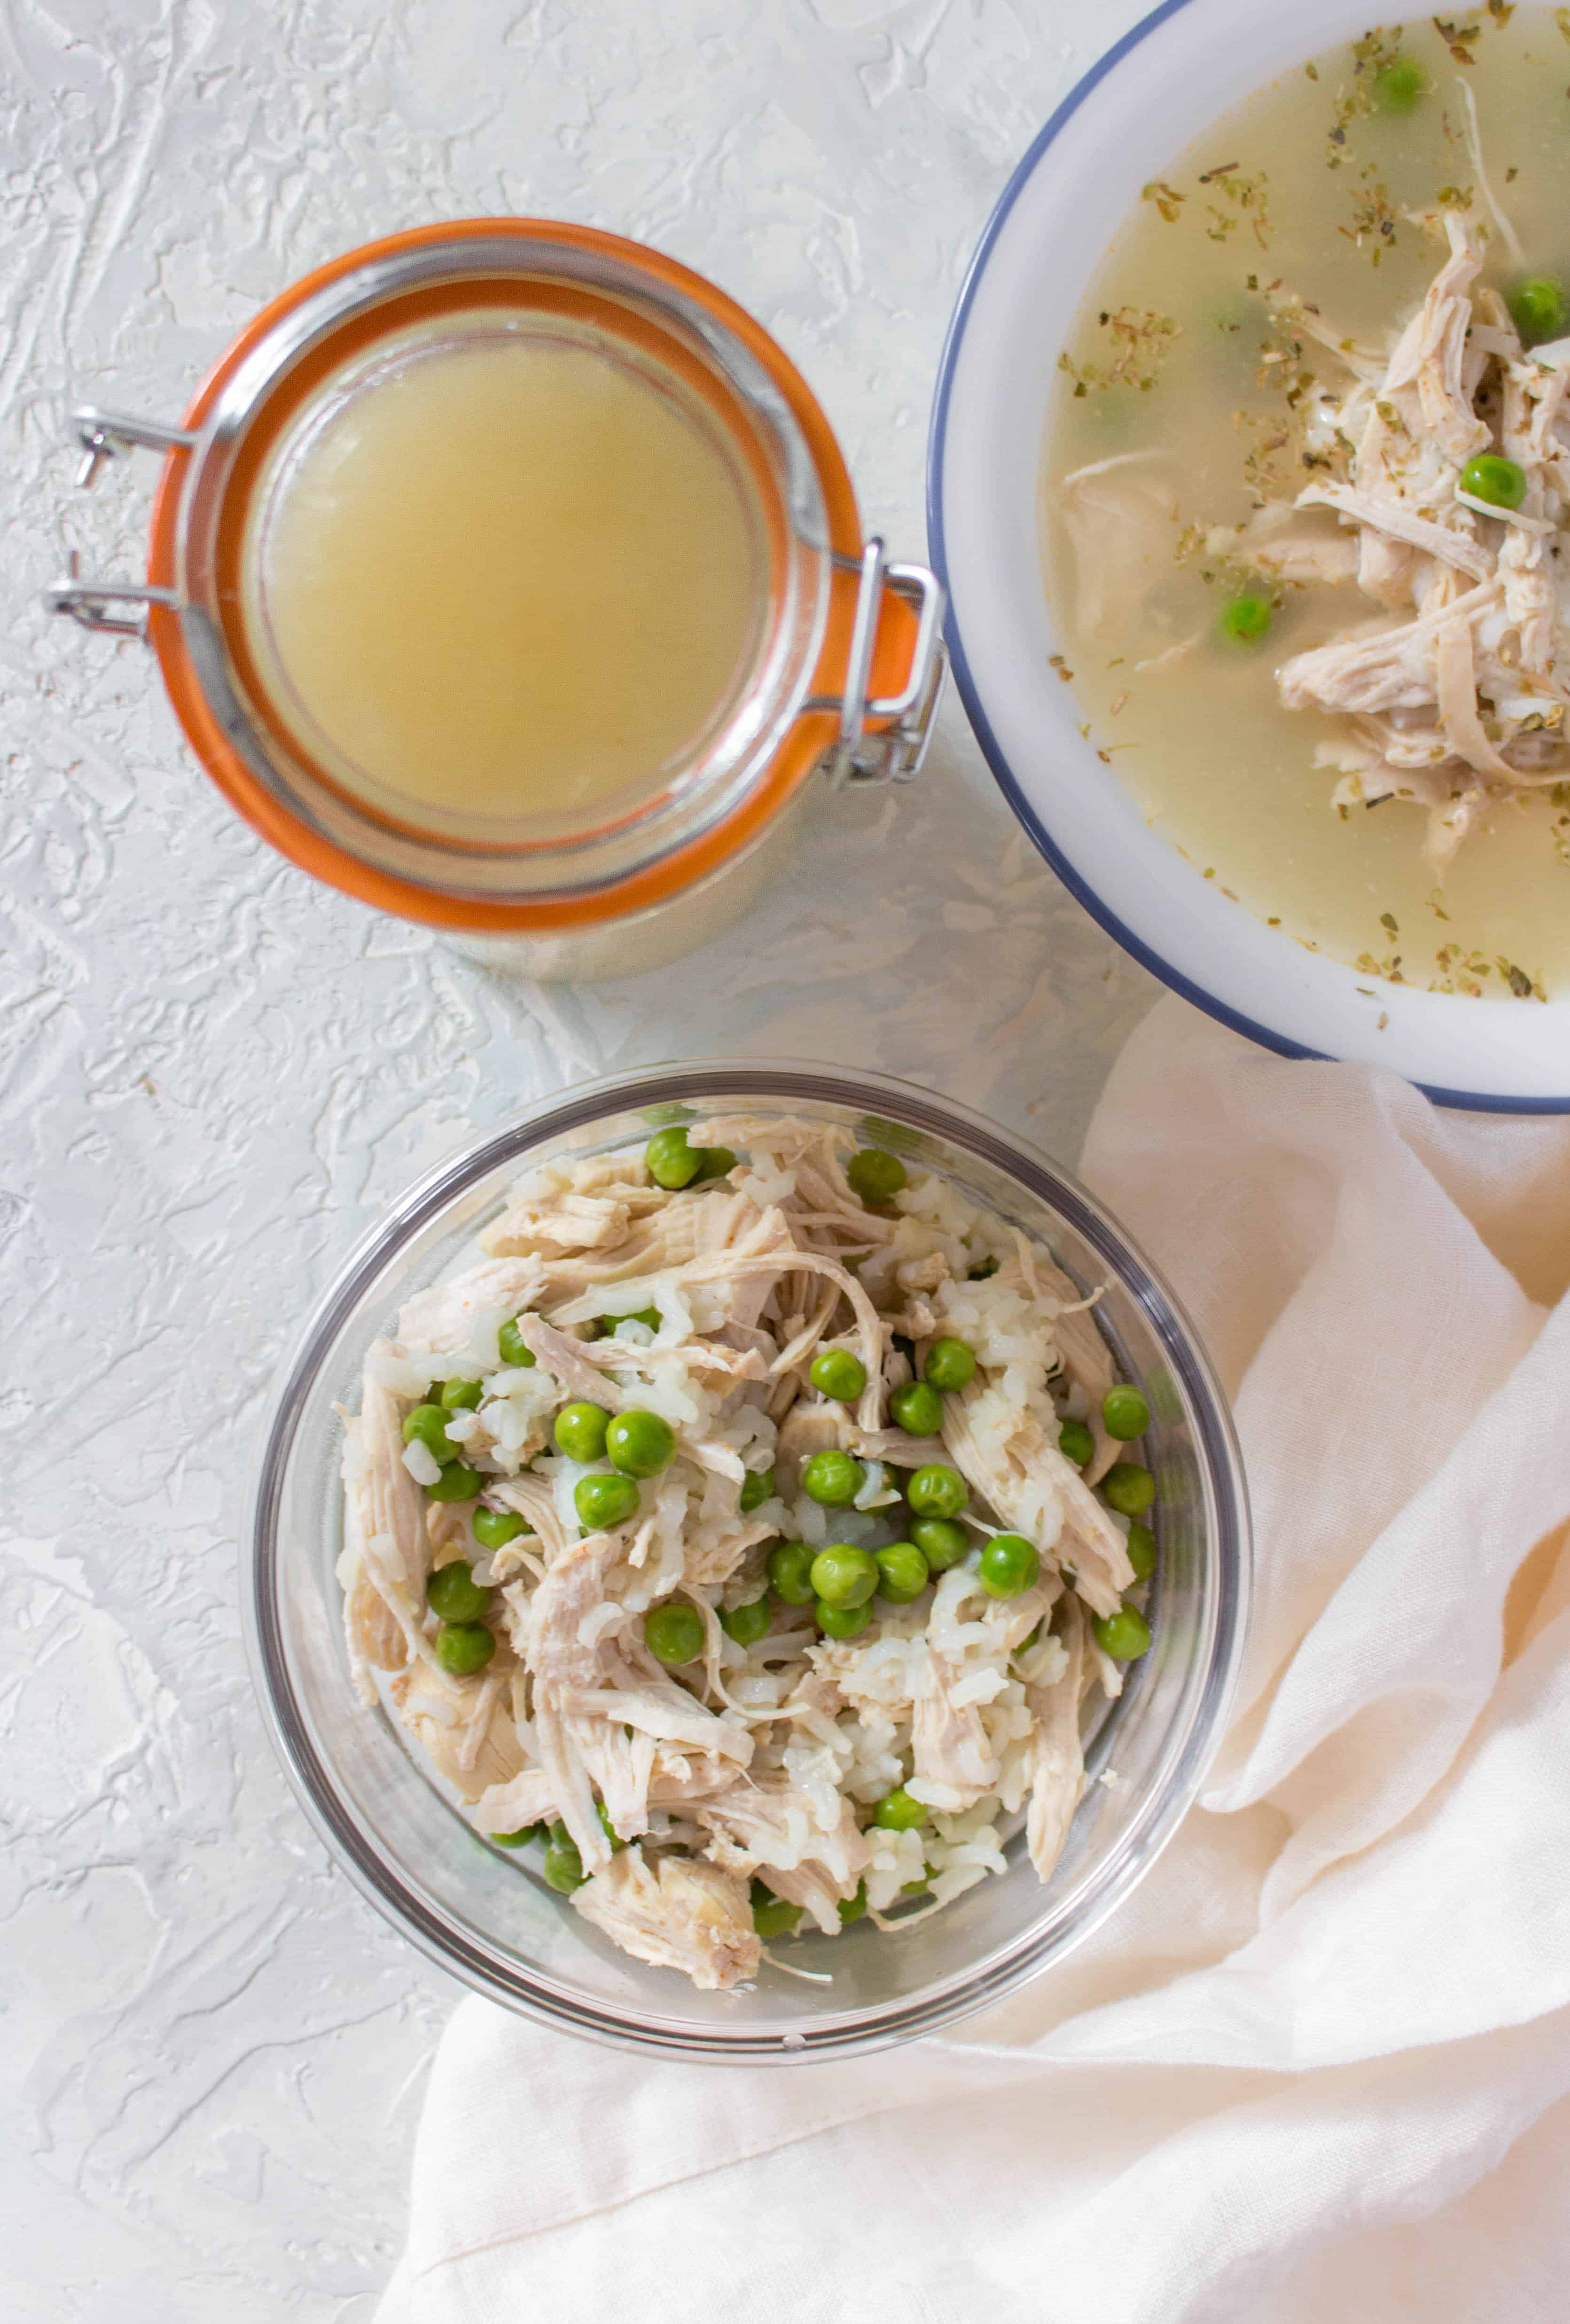 This Instant Pot Lemon Chicken and Rice Soup is a delicious and versatile recipe that is perfect for the cold weather! Slow Cooker instructions included for though without an Instant Pot!